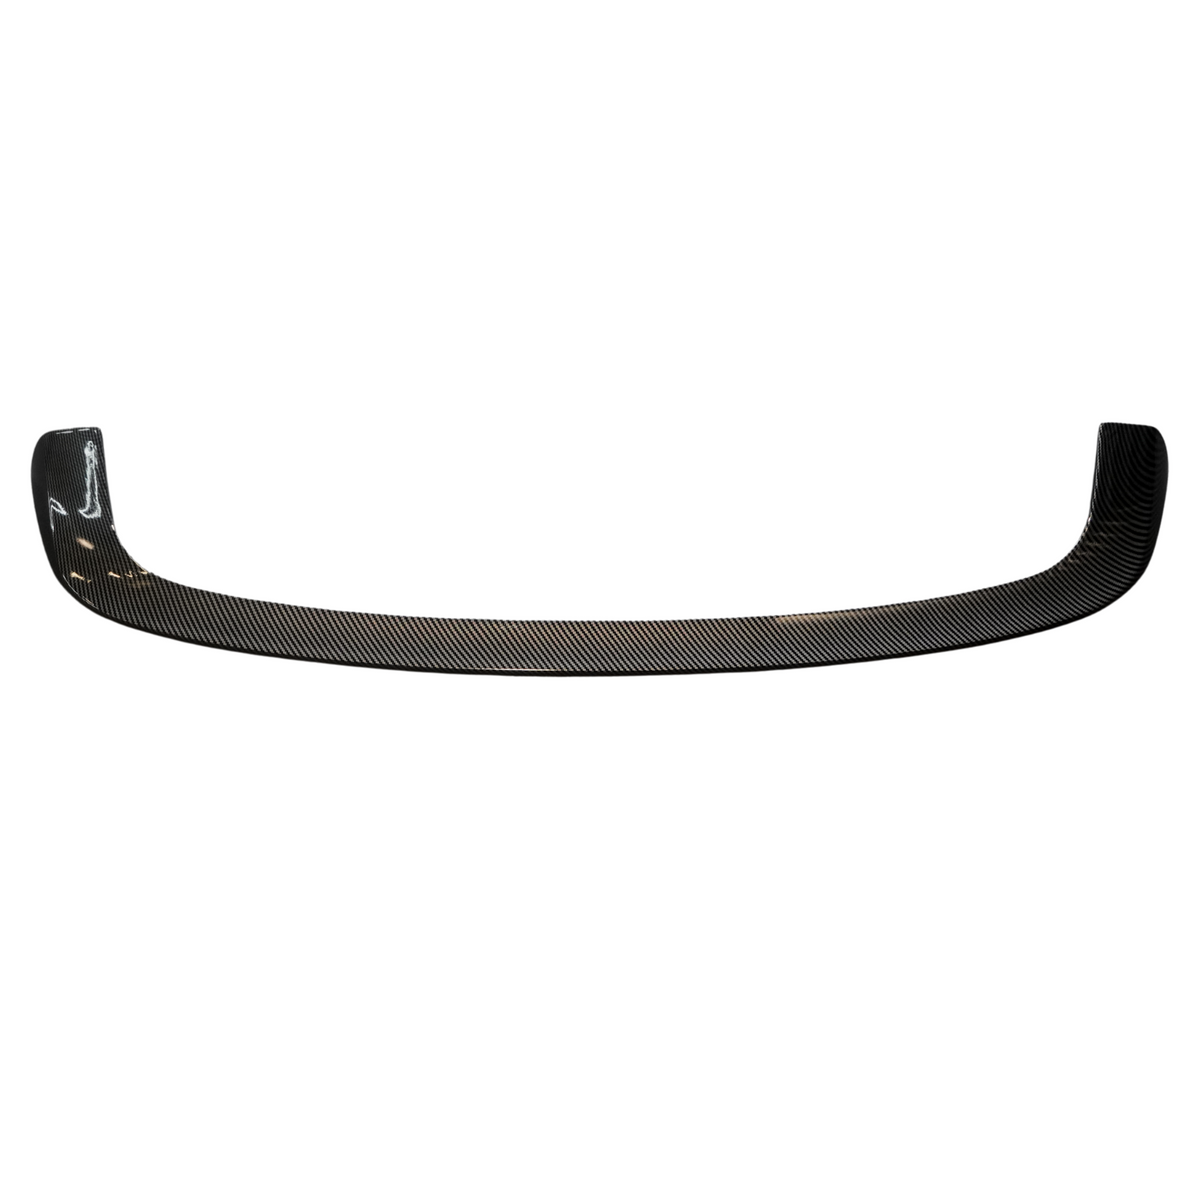 Bmw 1 Series F20 2011-2018 Rear Spoiler V2 In Carbon Look